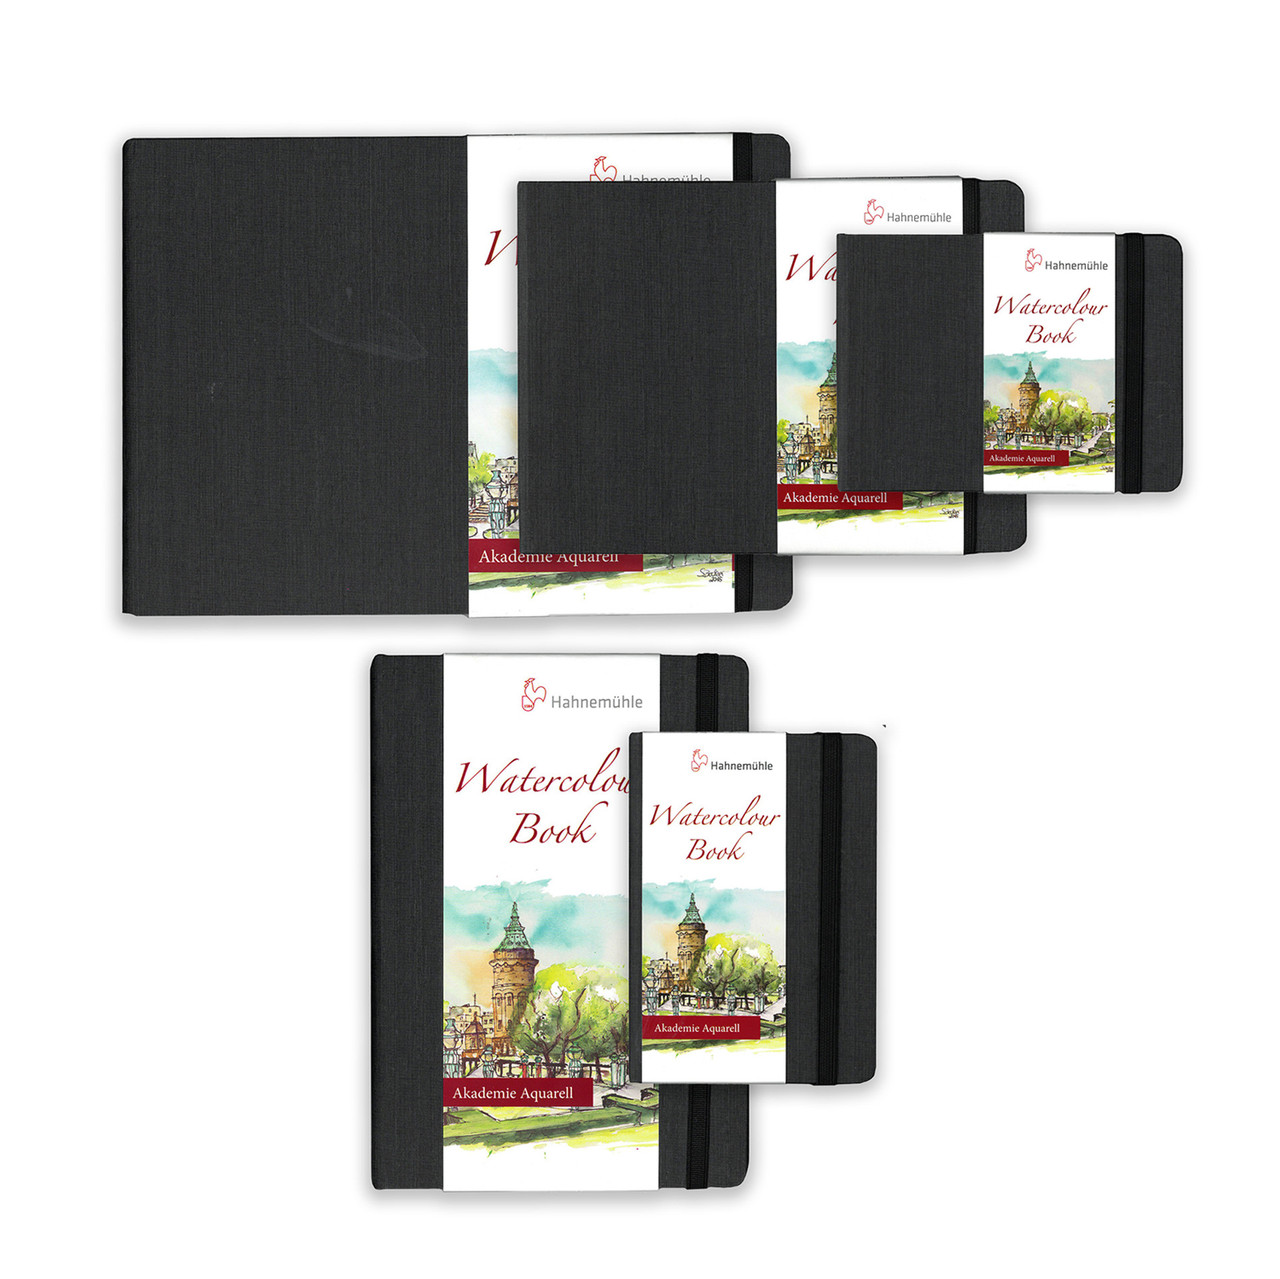 Hahnemuhle Watercolor Books